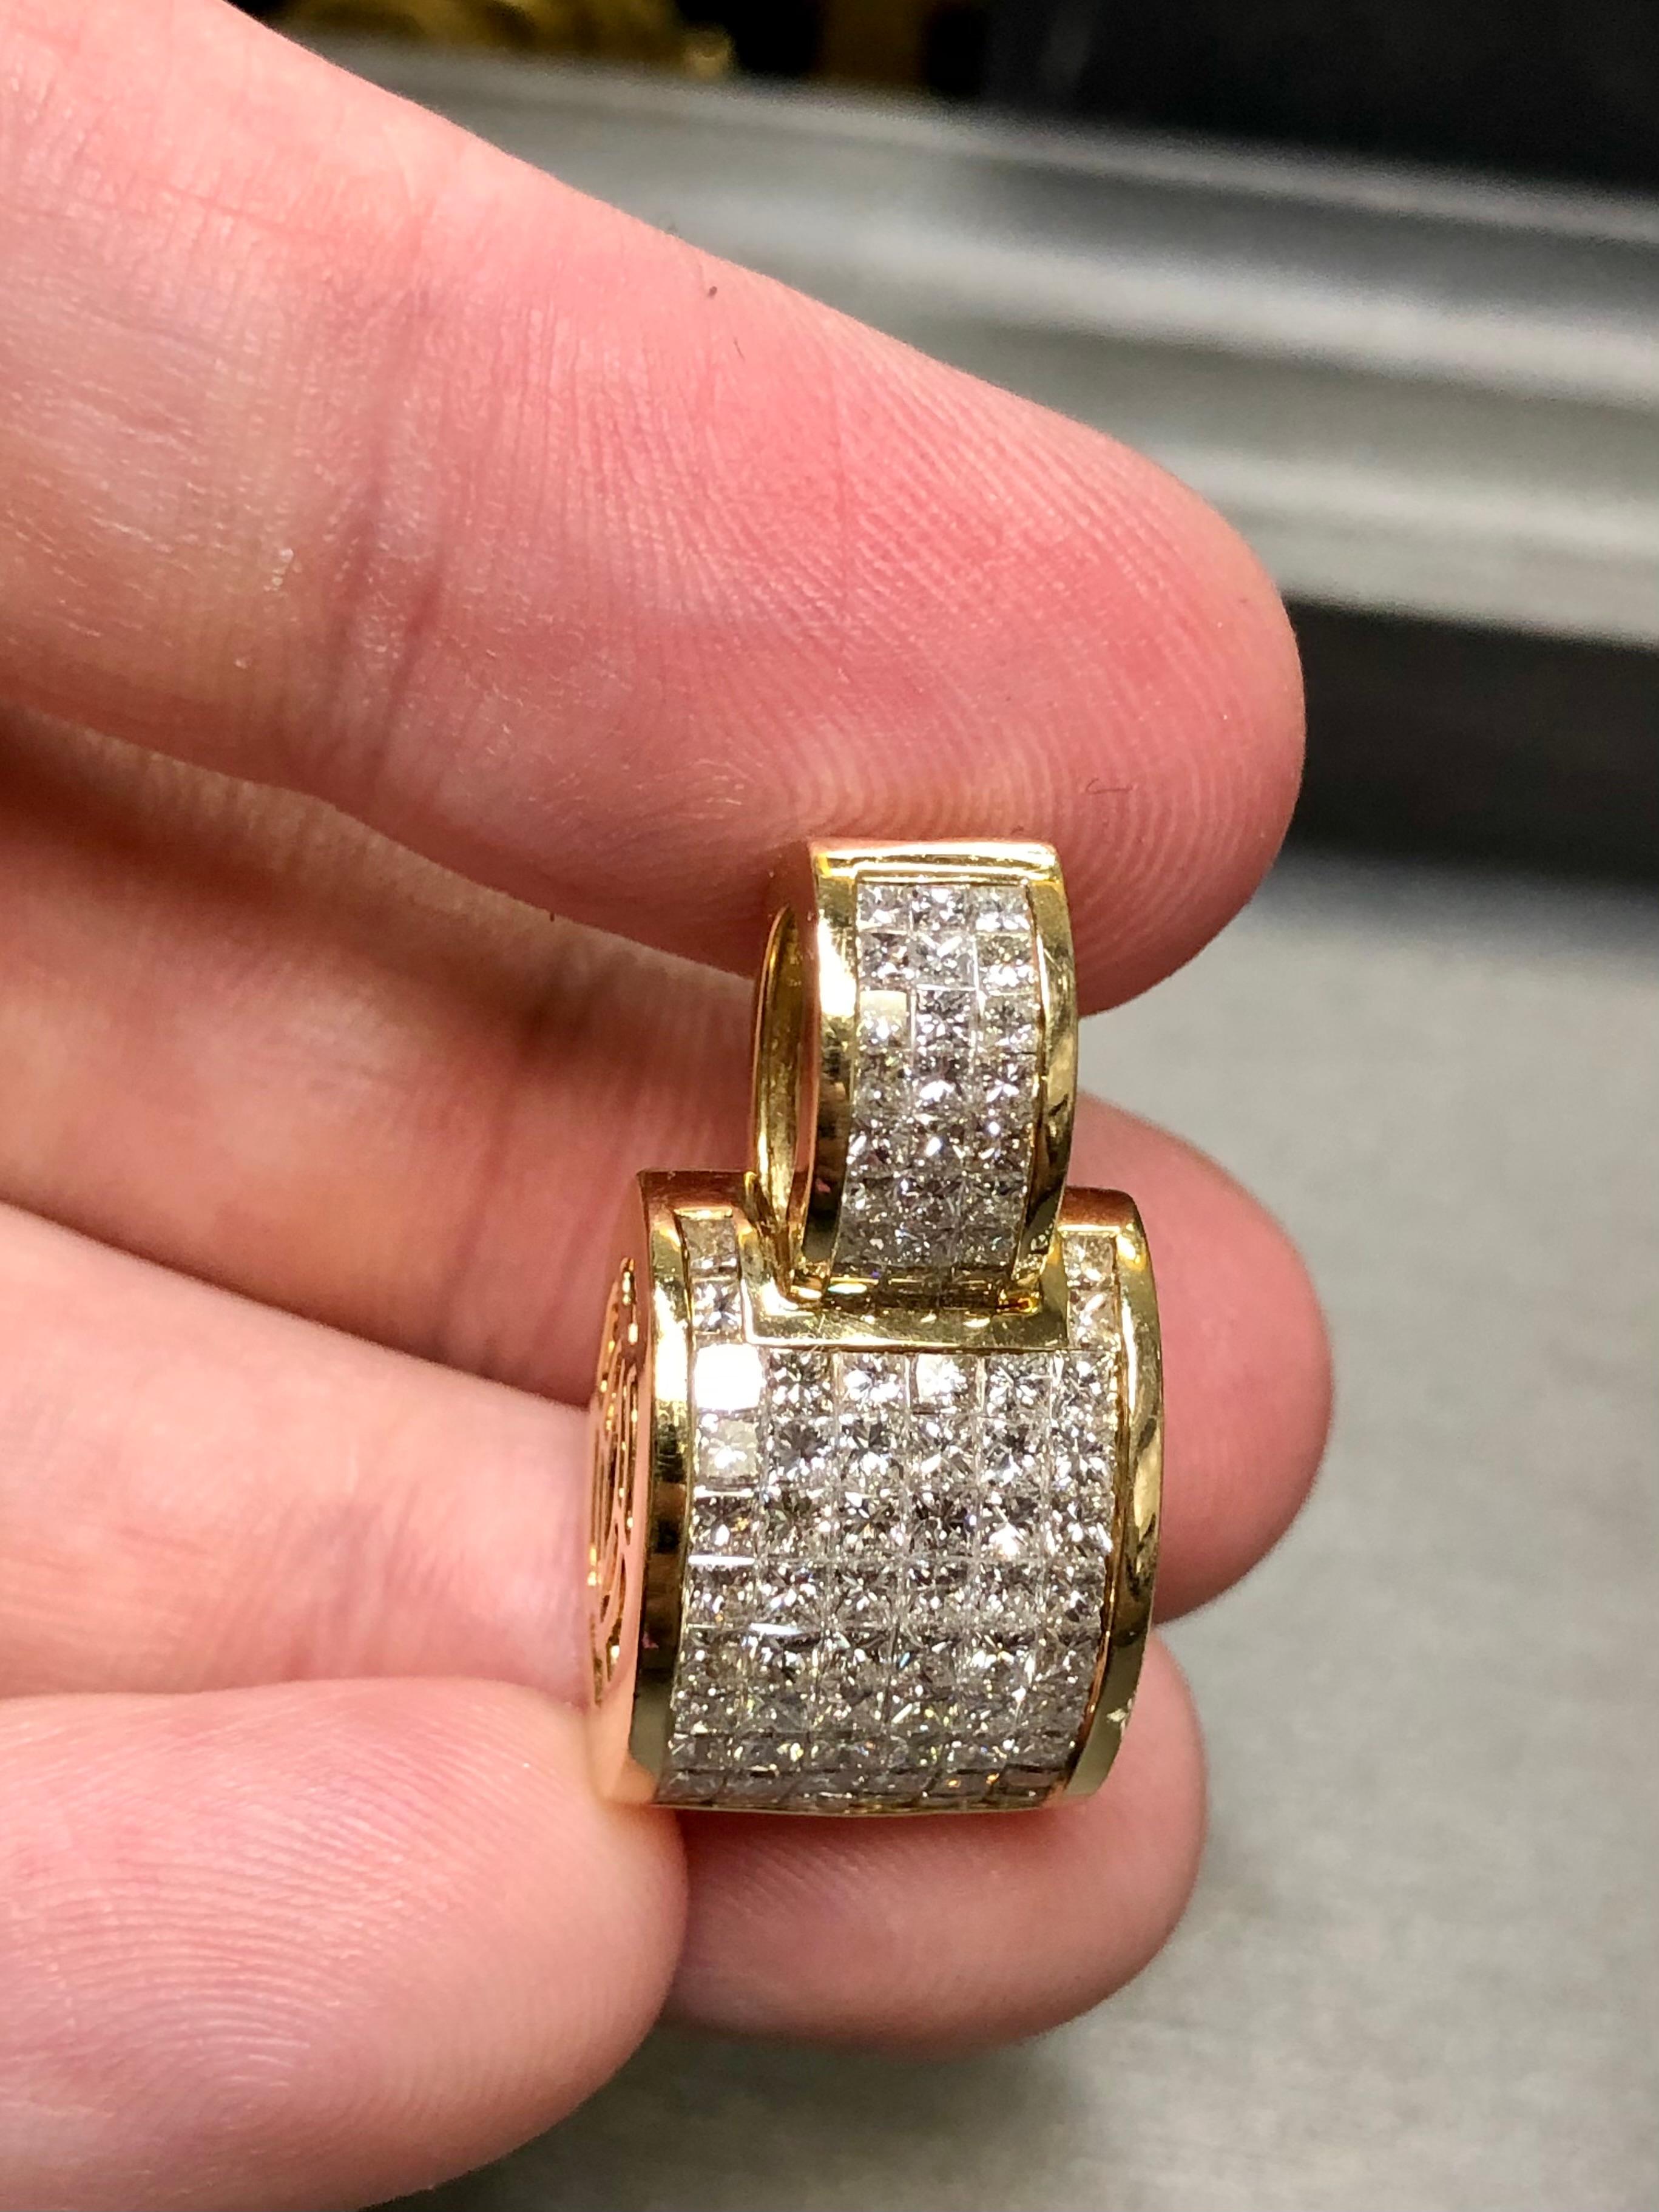 Estate 18k Invisible Princess Cut Diamond Pendant Necklace 4.92cttw G Vs In Good Condition For Sale In Winter Springs, FL